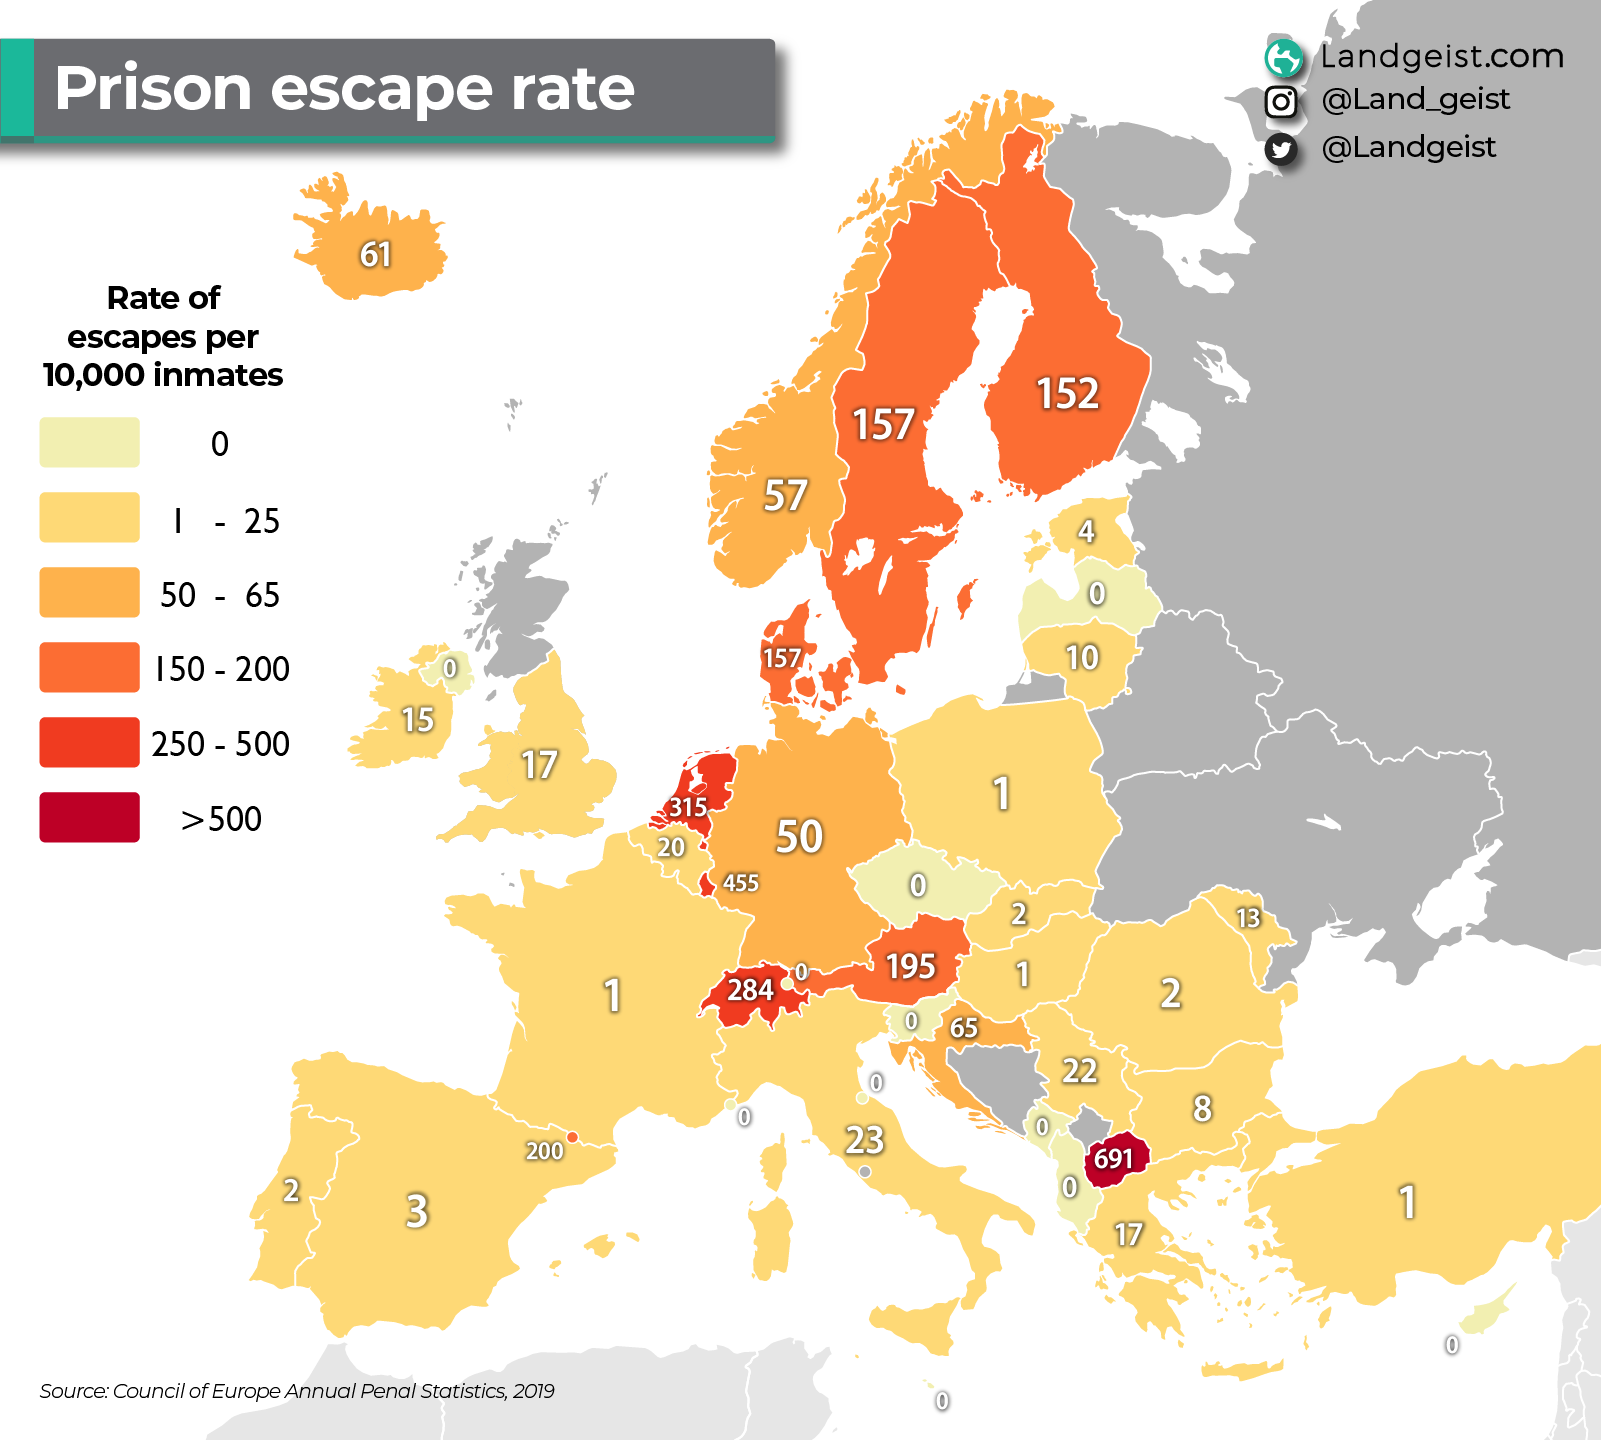 Map of the prison escape rate in Europe.